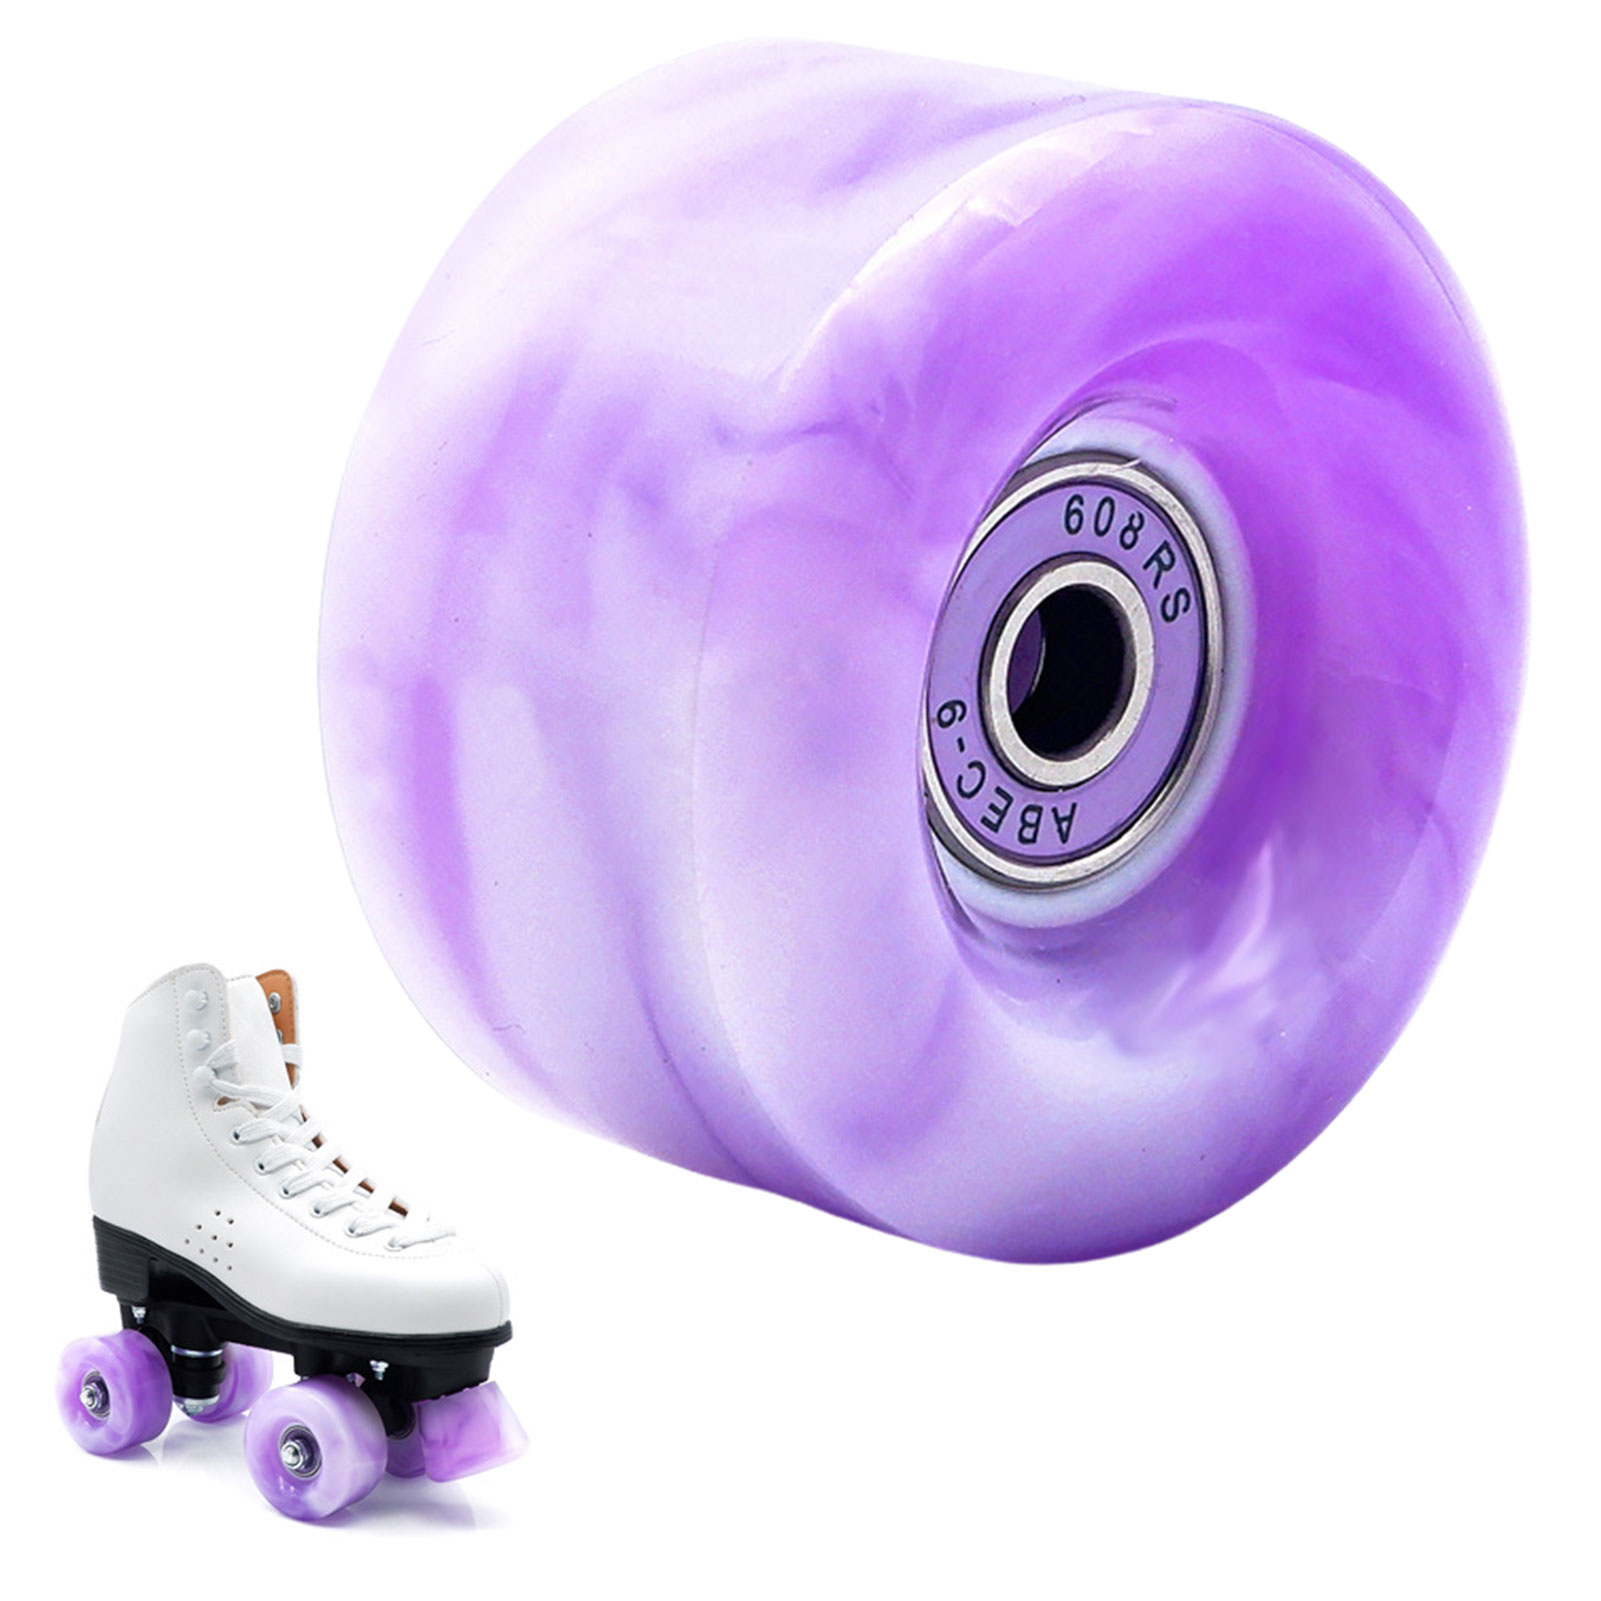 Quad Skates Wheels 82A 58*32mm Including Bearings ABEC-5 PU Quad Roller Skates Outdoor And Indoor Accessories Women Shoes No Led